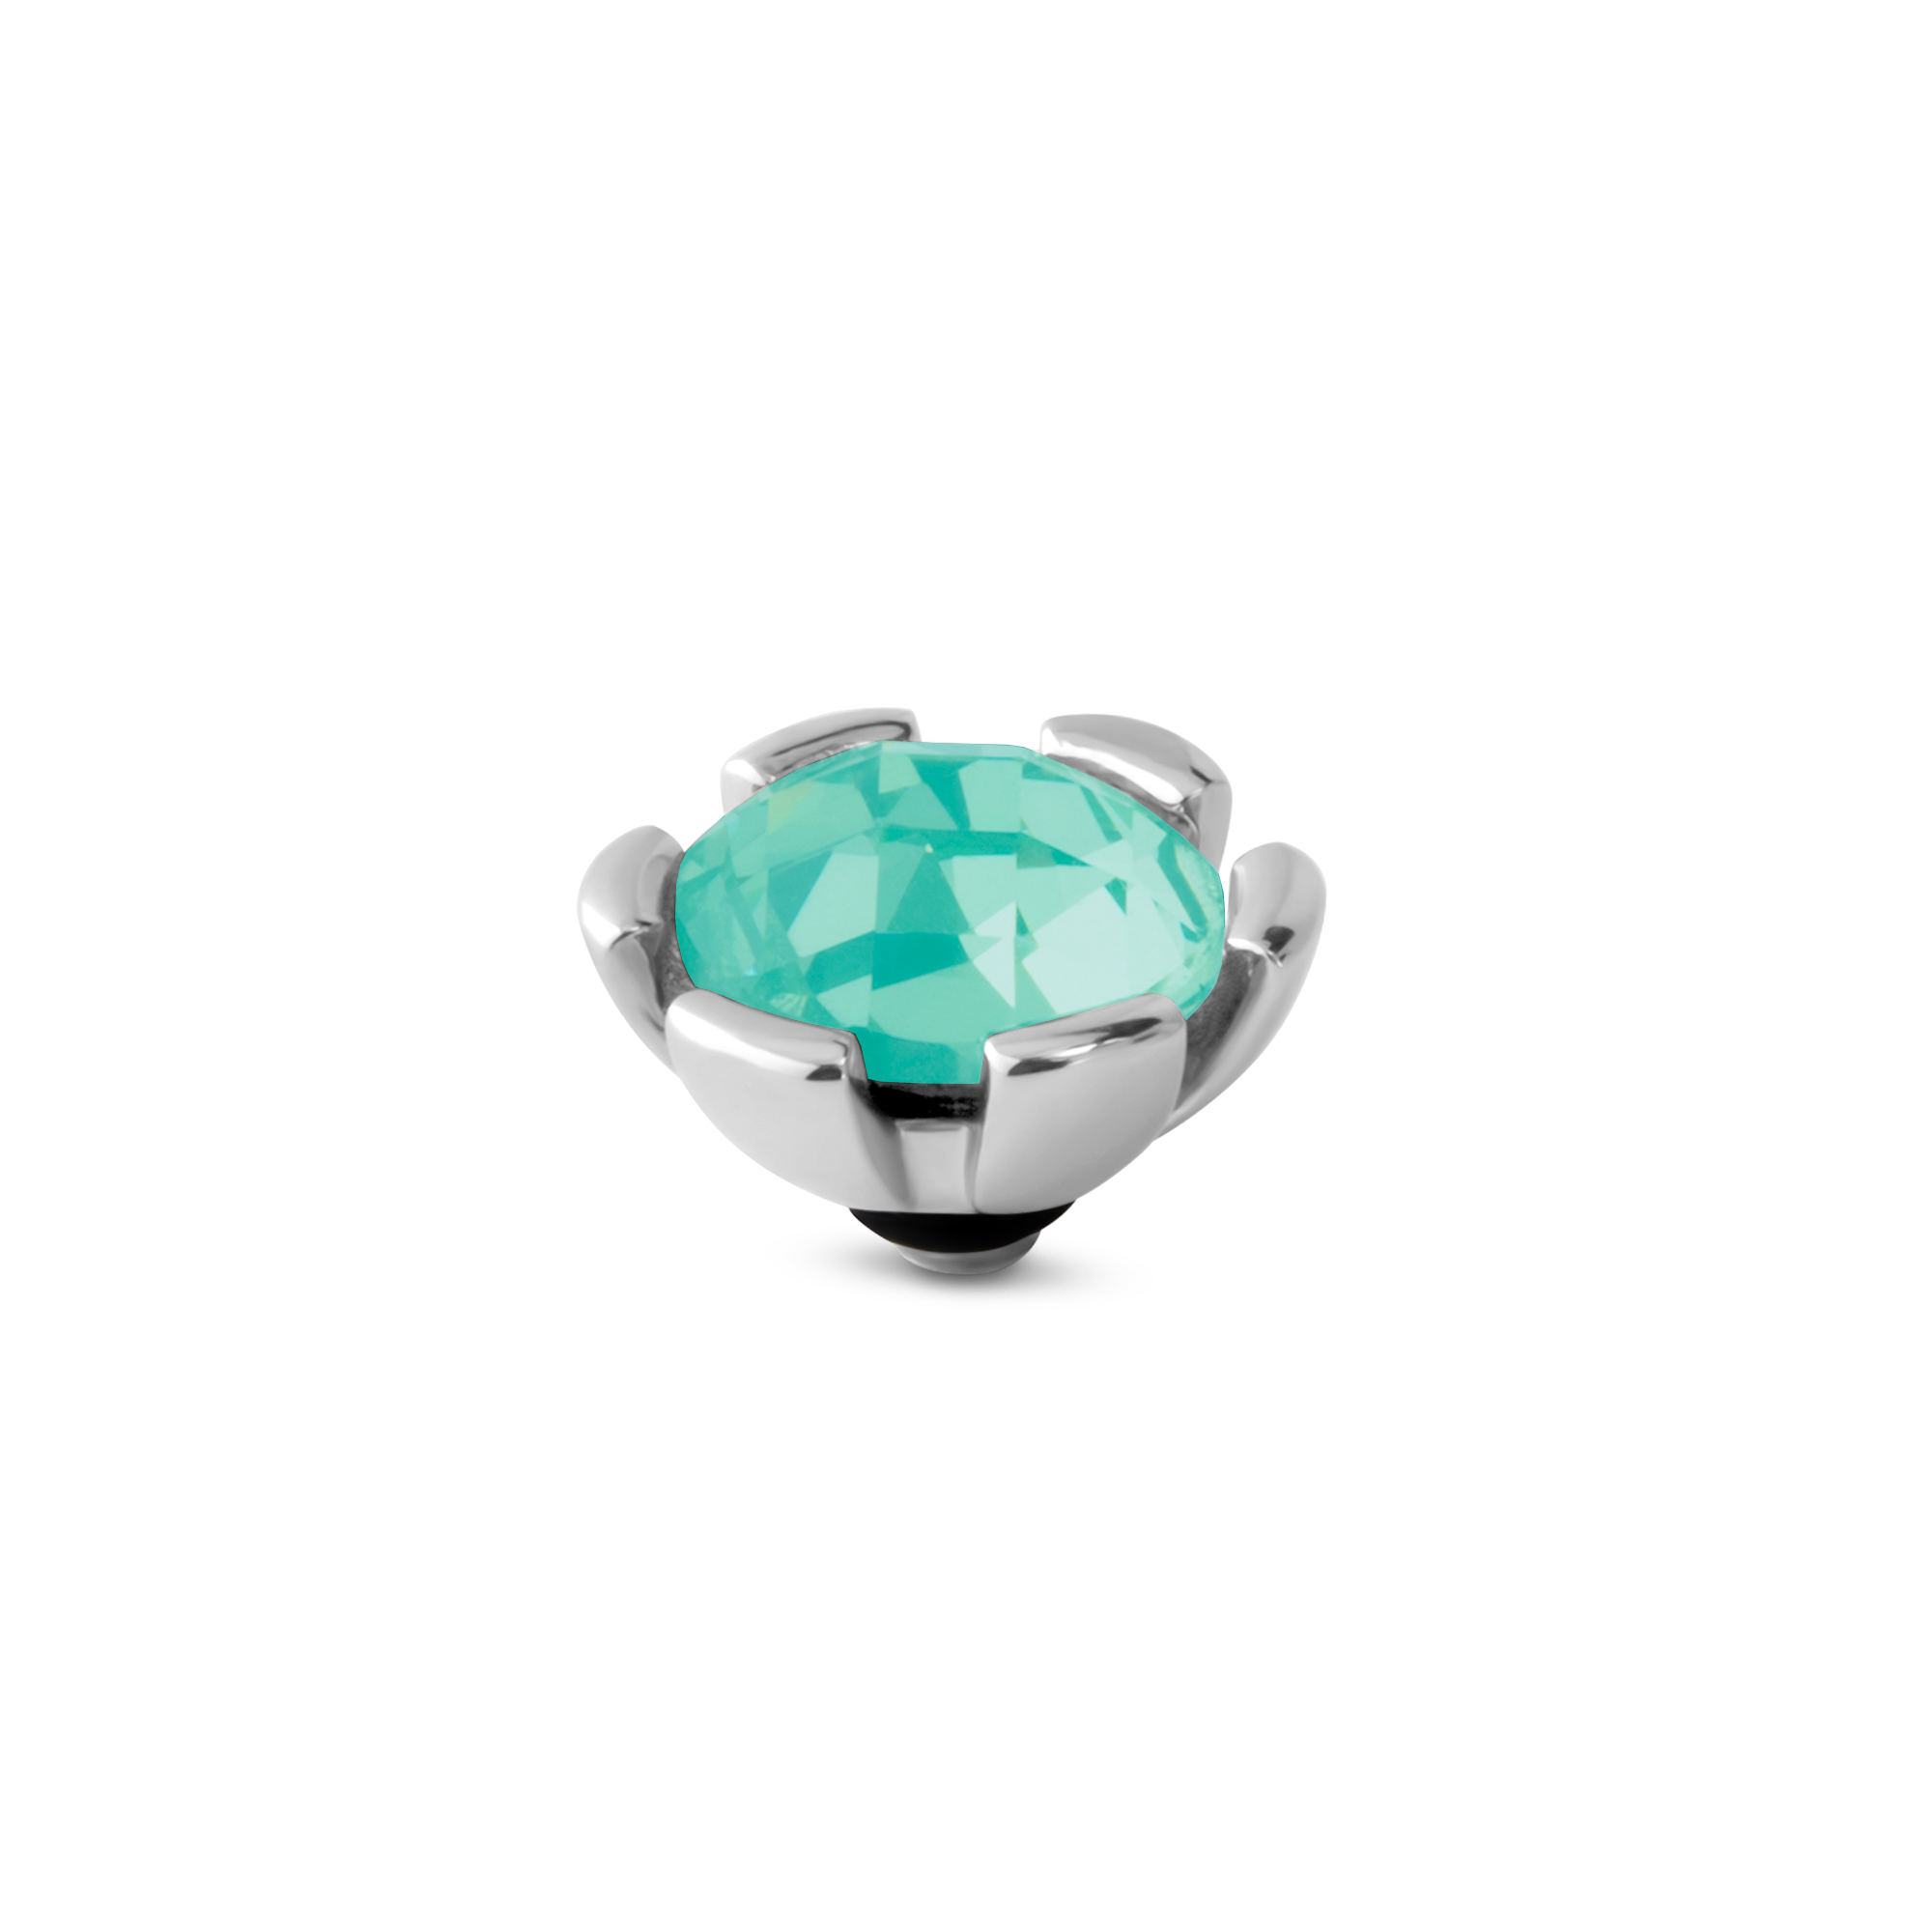 Melano Twisted Secured Steentje Turquoise | Zilver